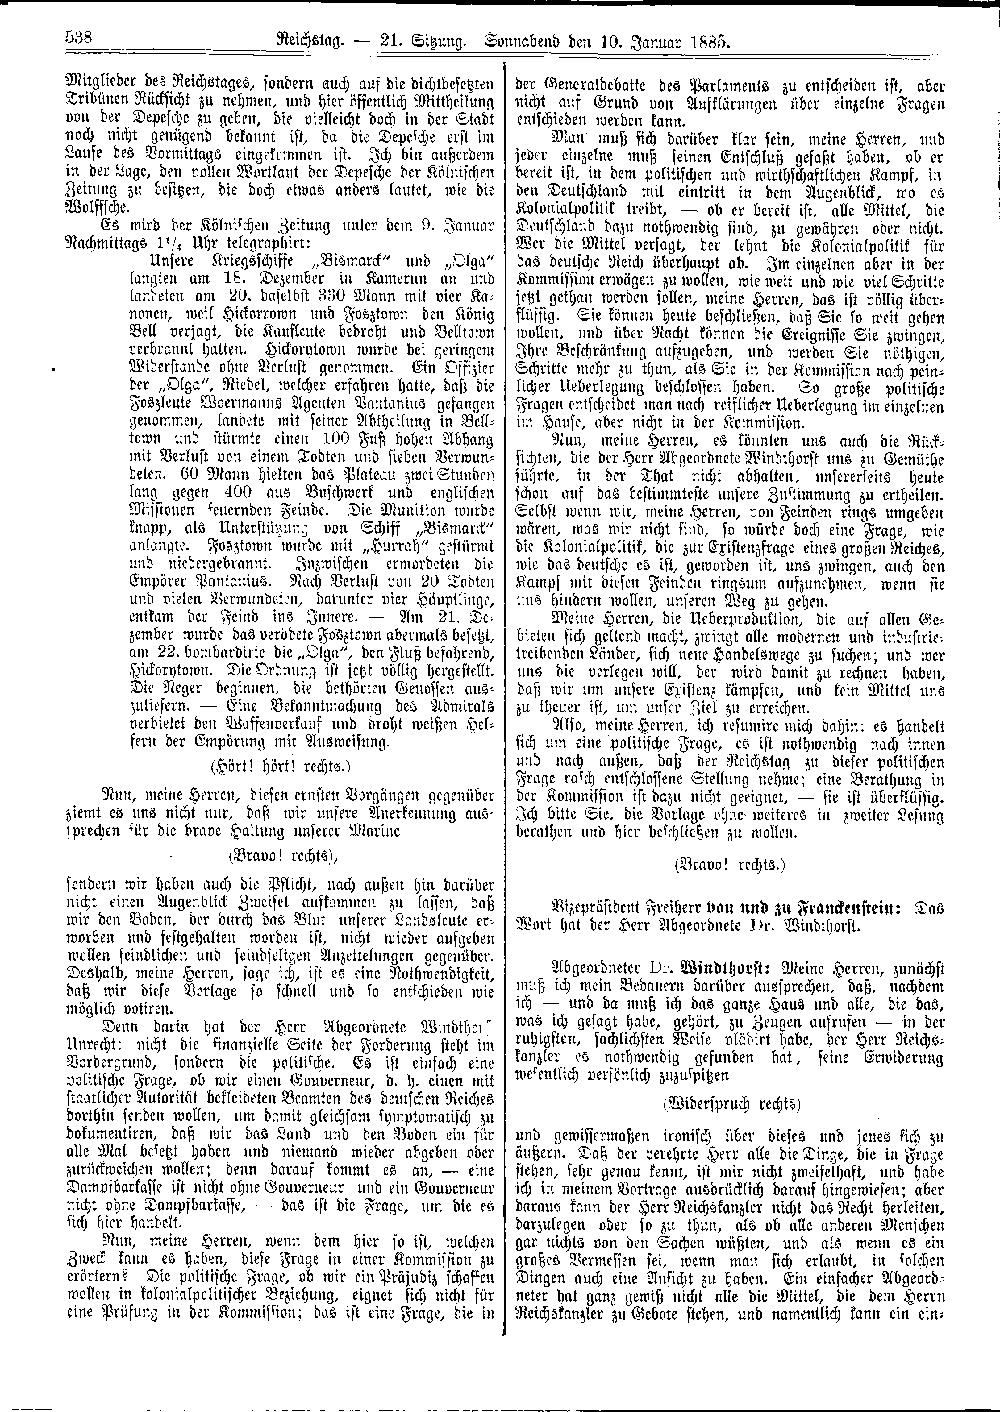 Scan of page 538